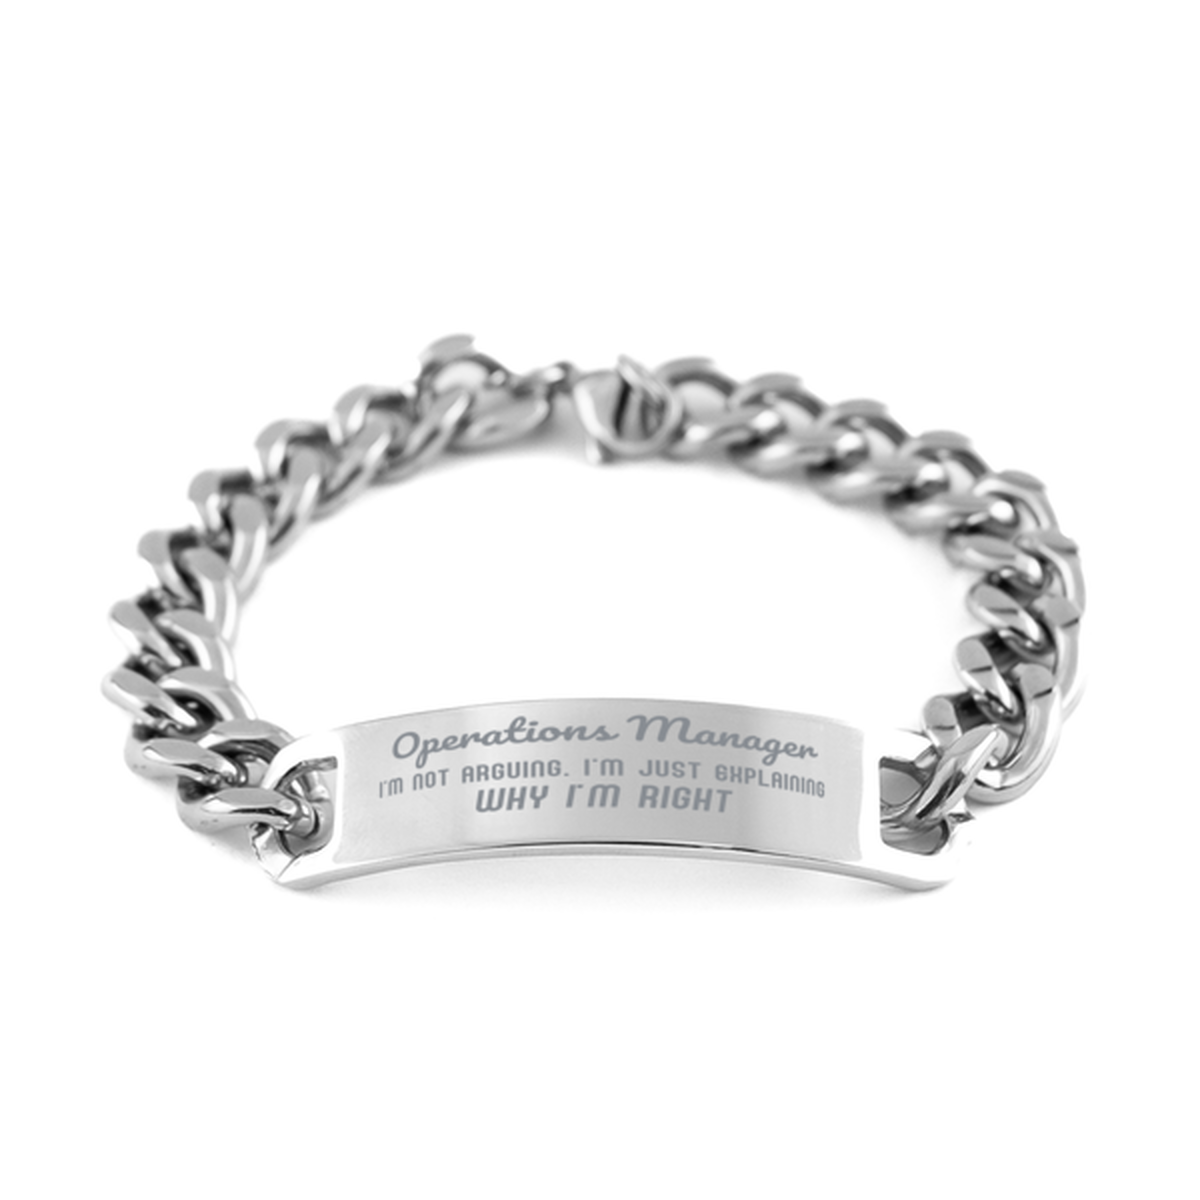 Operations Manager I'm not Arguing. I'm Just Explaining Why I'm RIGHT Cuban Chain Stainless Steel Bracelet, Graduation Birthday Christmas Operations Manager Gifts For Operations Manager Funny Saying Quote Present for Men Women Coworker